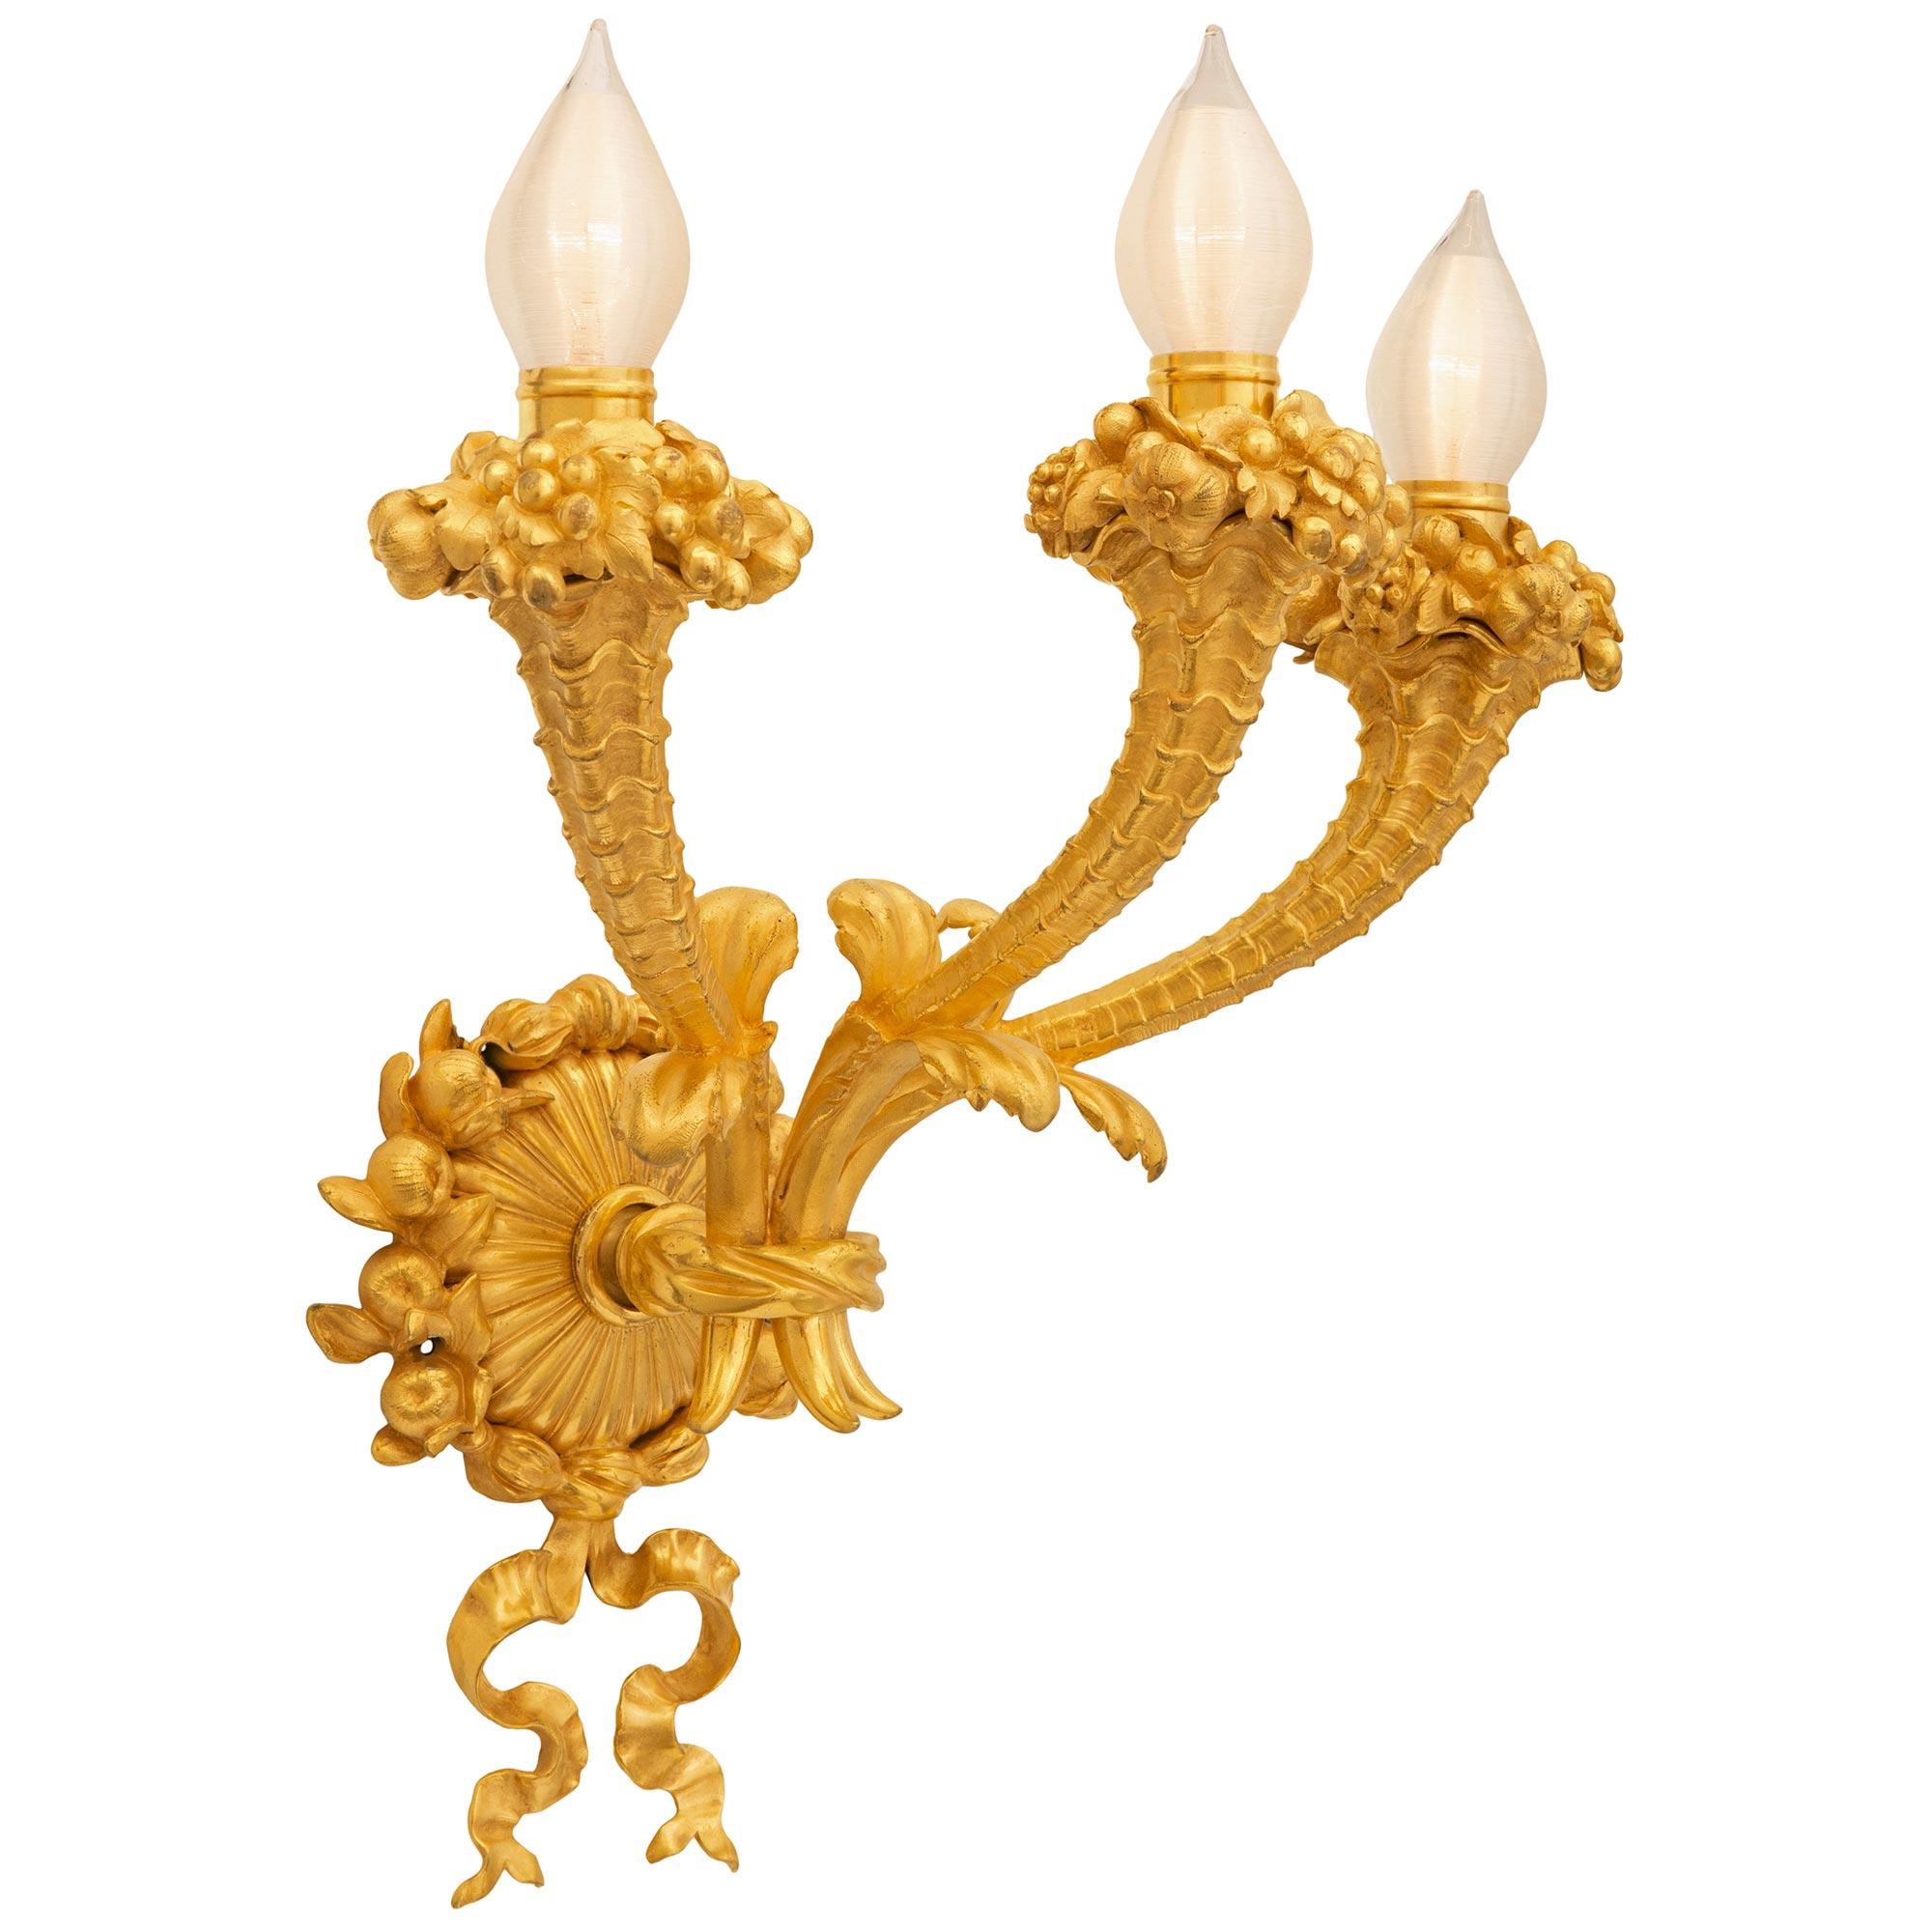 A sensational and extremely decorative pair of French 19th century Louis XVI st. ormolu sconces. Each three arm sconce is centered by a striking reeded backplate with most charming intricately detailed swaging floral garland's tied with charming